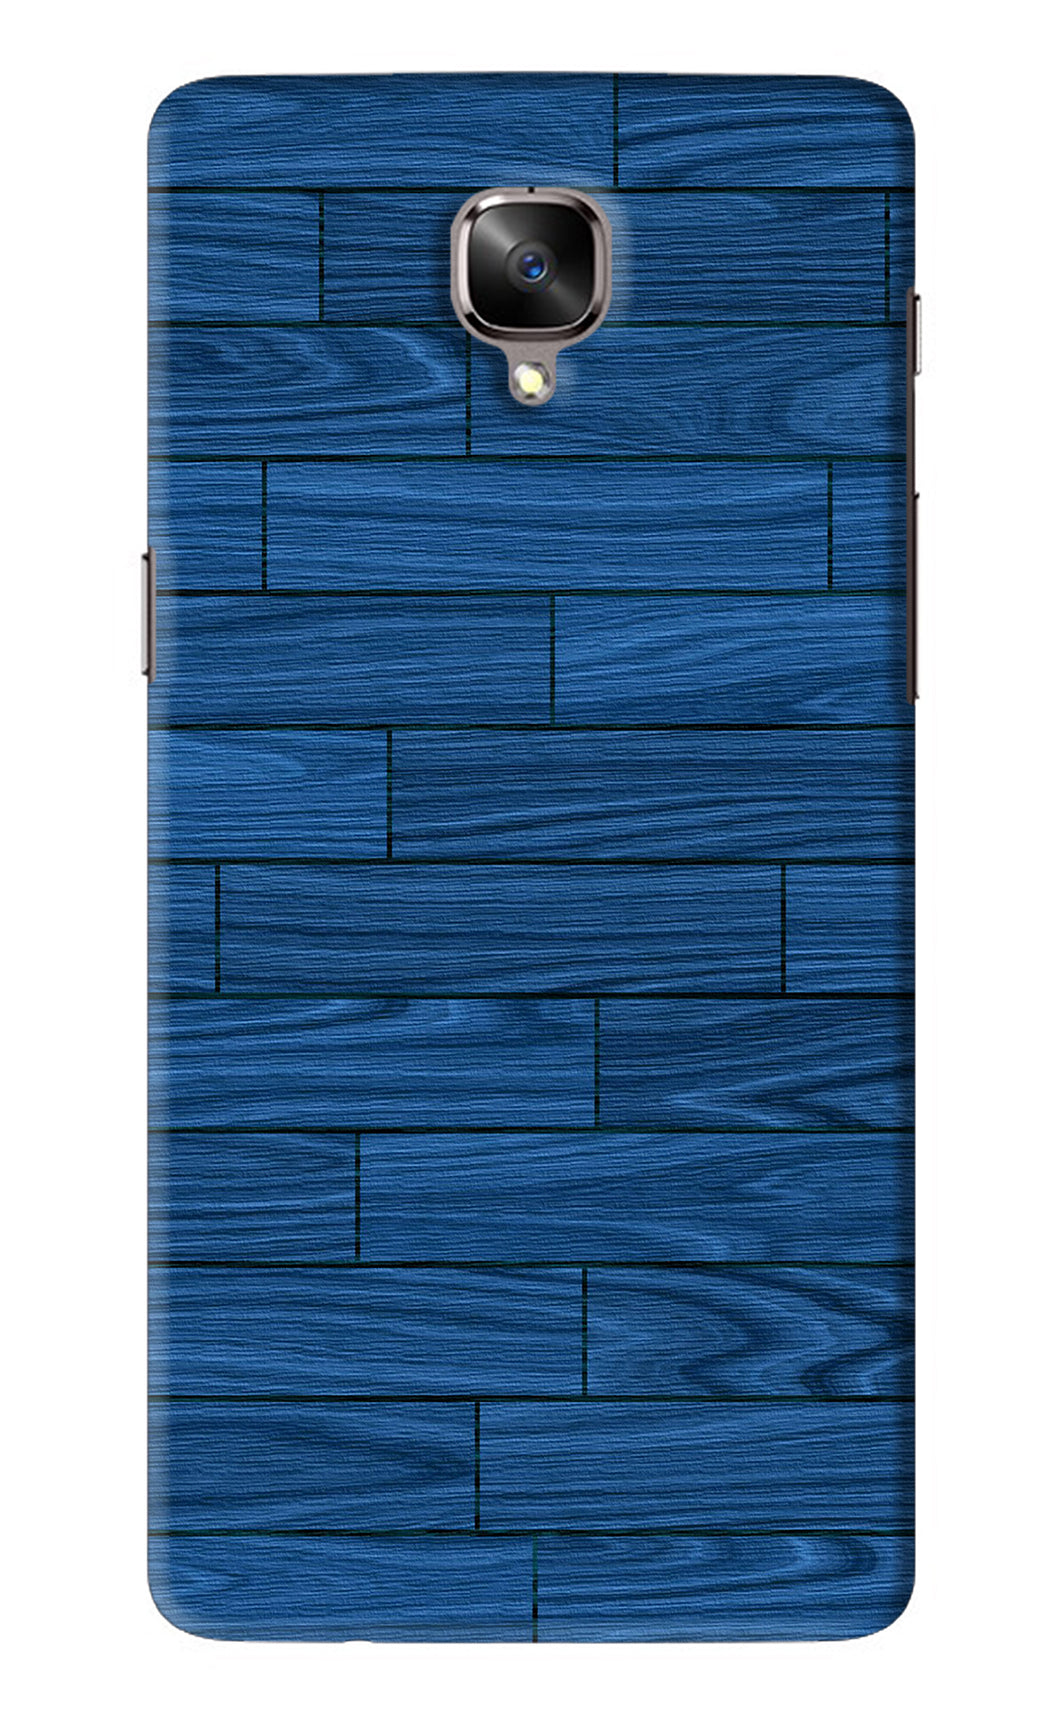 Blue Wooden Texture OnePlus 3T Back Skin Wrap